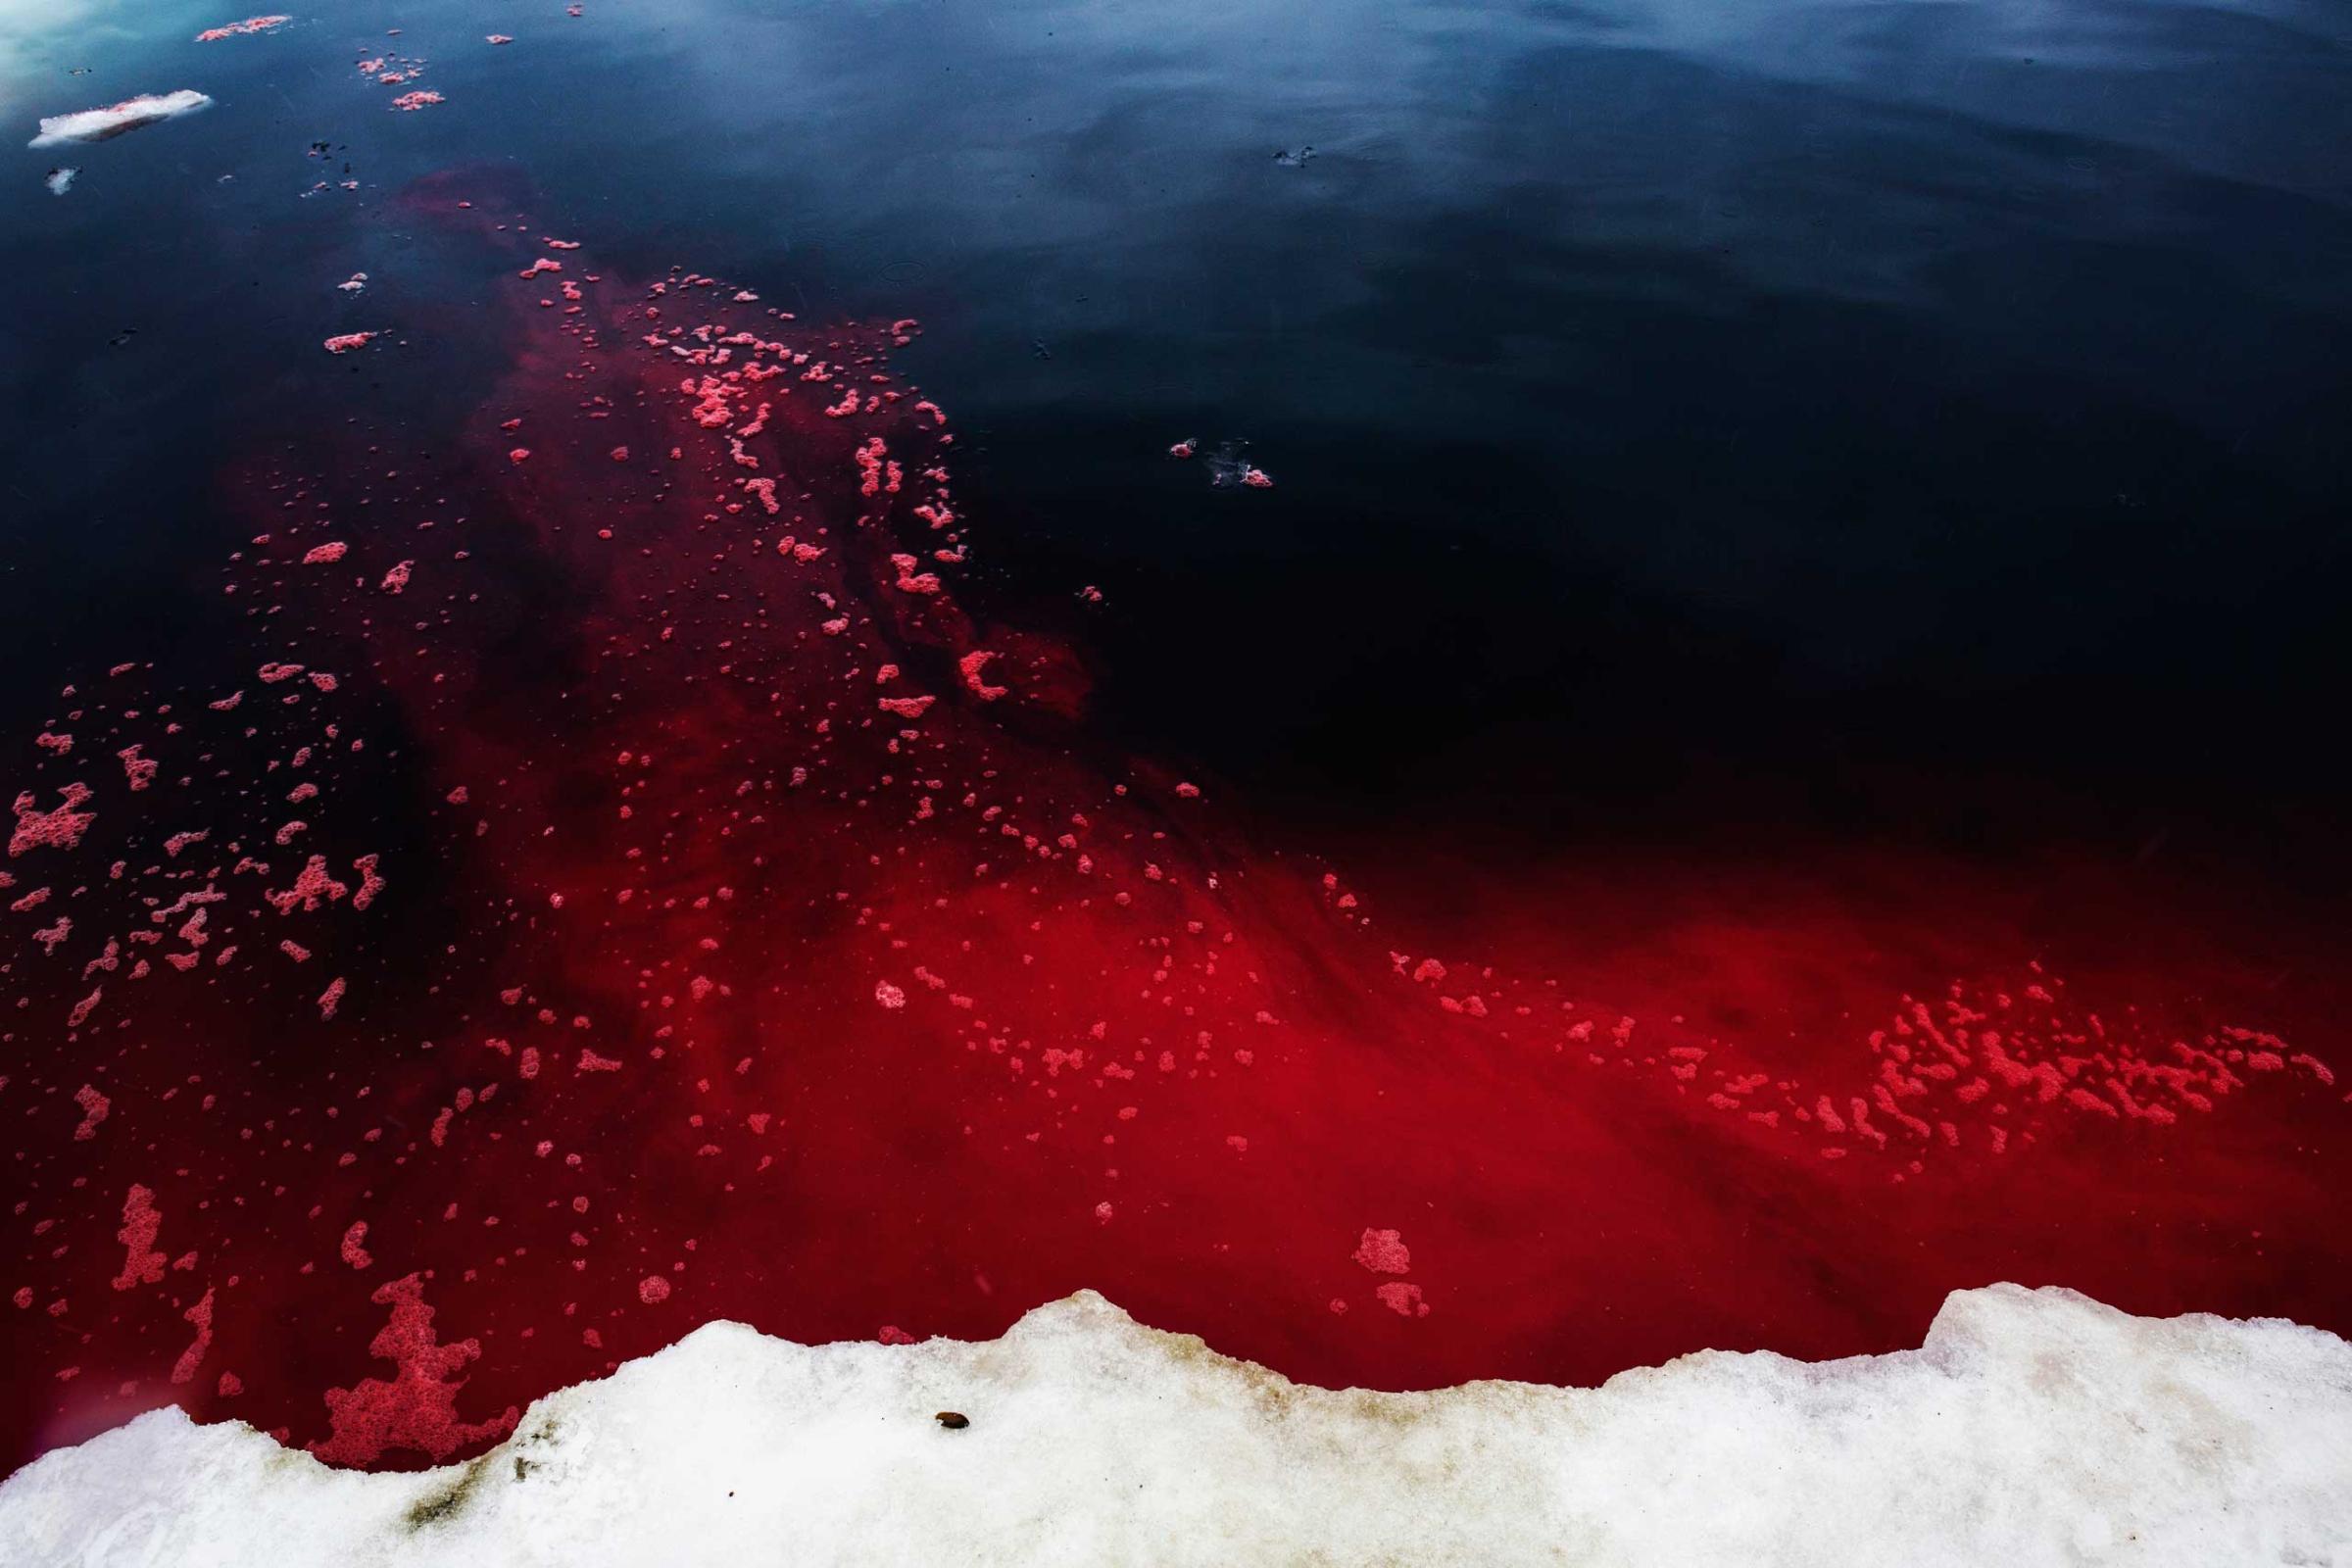 Walrus blood in the Arctic Ocean near Barrow, Alaska. Hunters looked for ugruk (bearded seal) after the sea ice "went out" but came upon hundreds of walrus instead. Walrus this close to town during this time of year is rare, and due to warming weather.